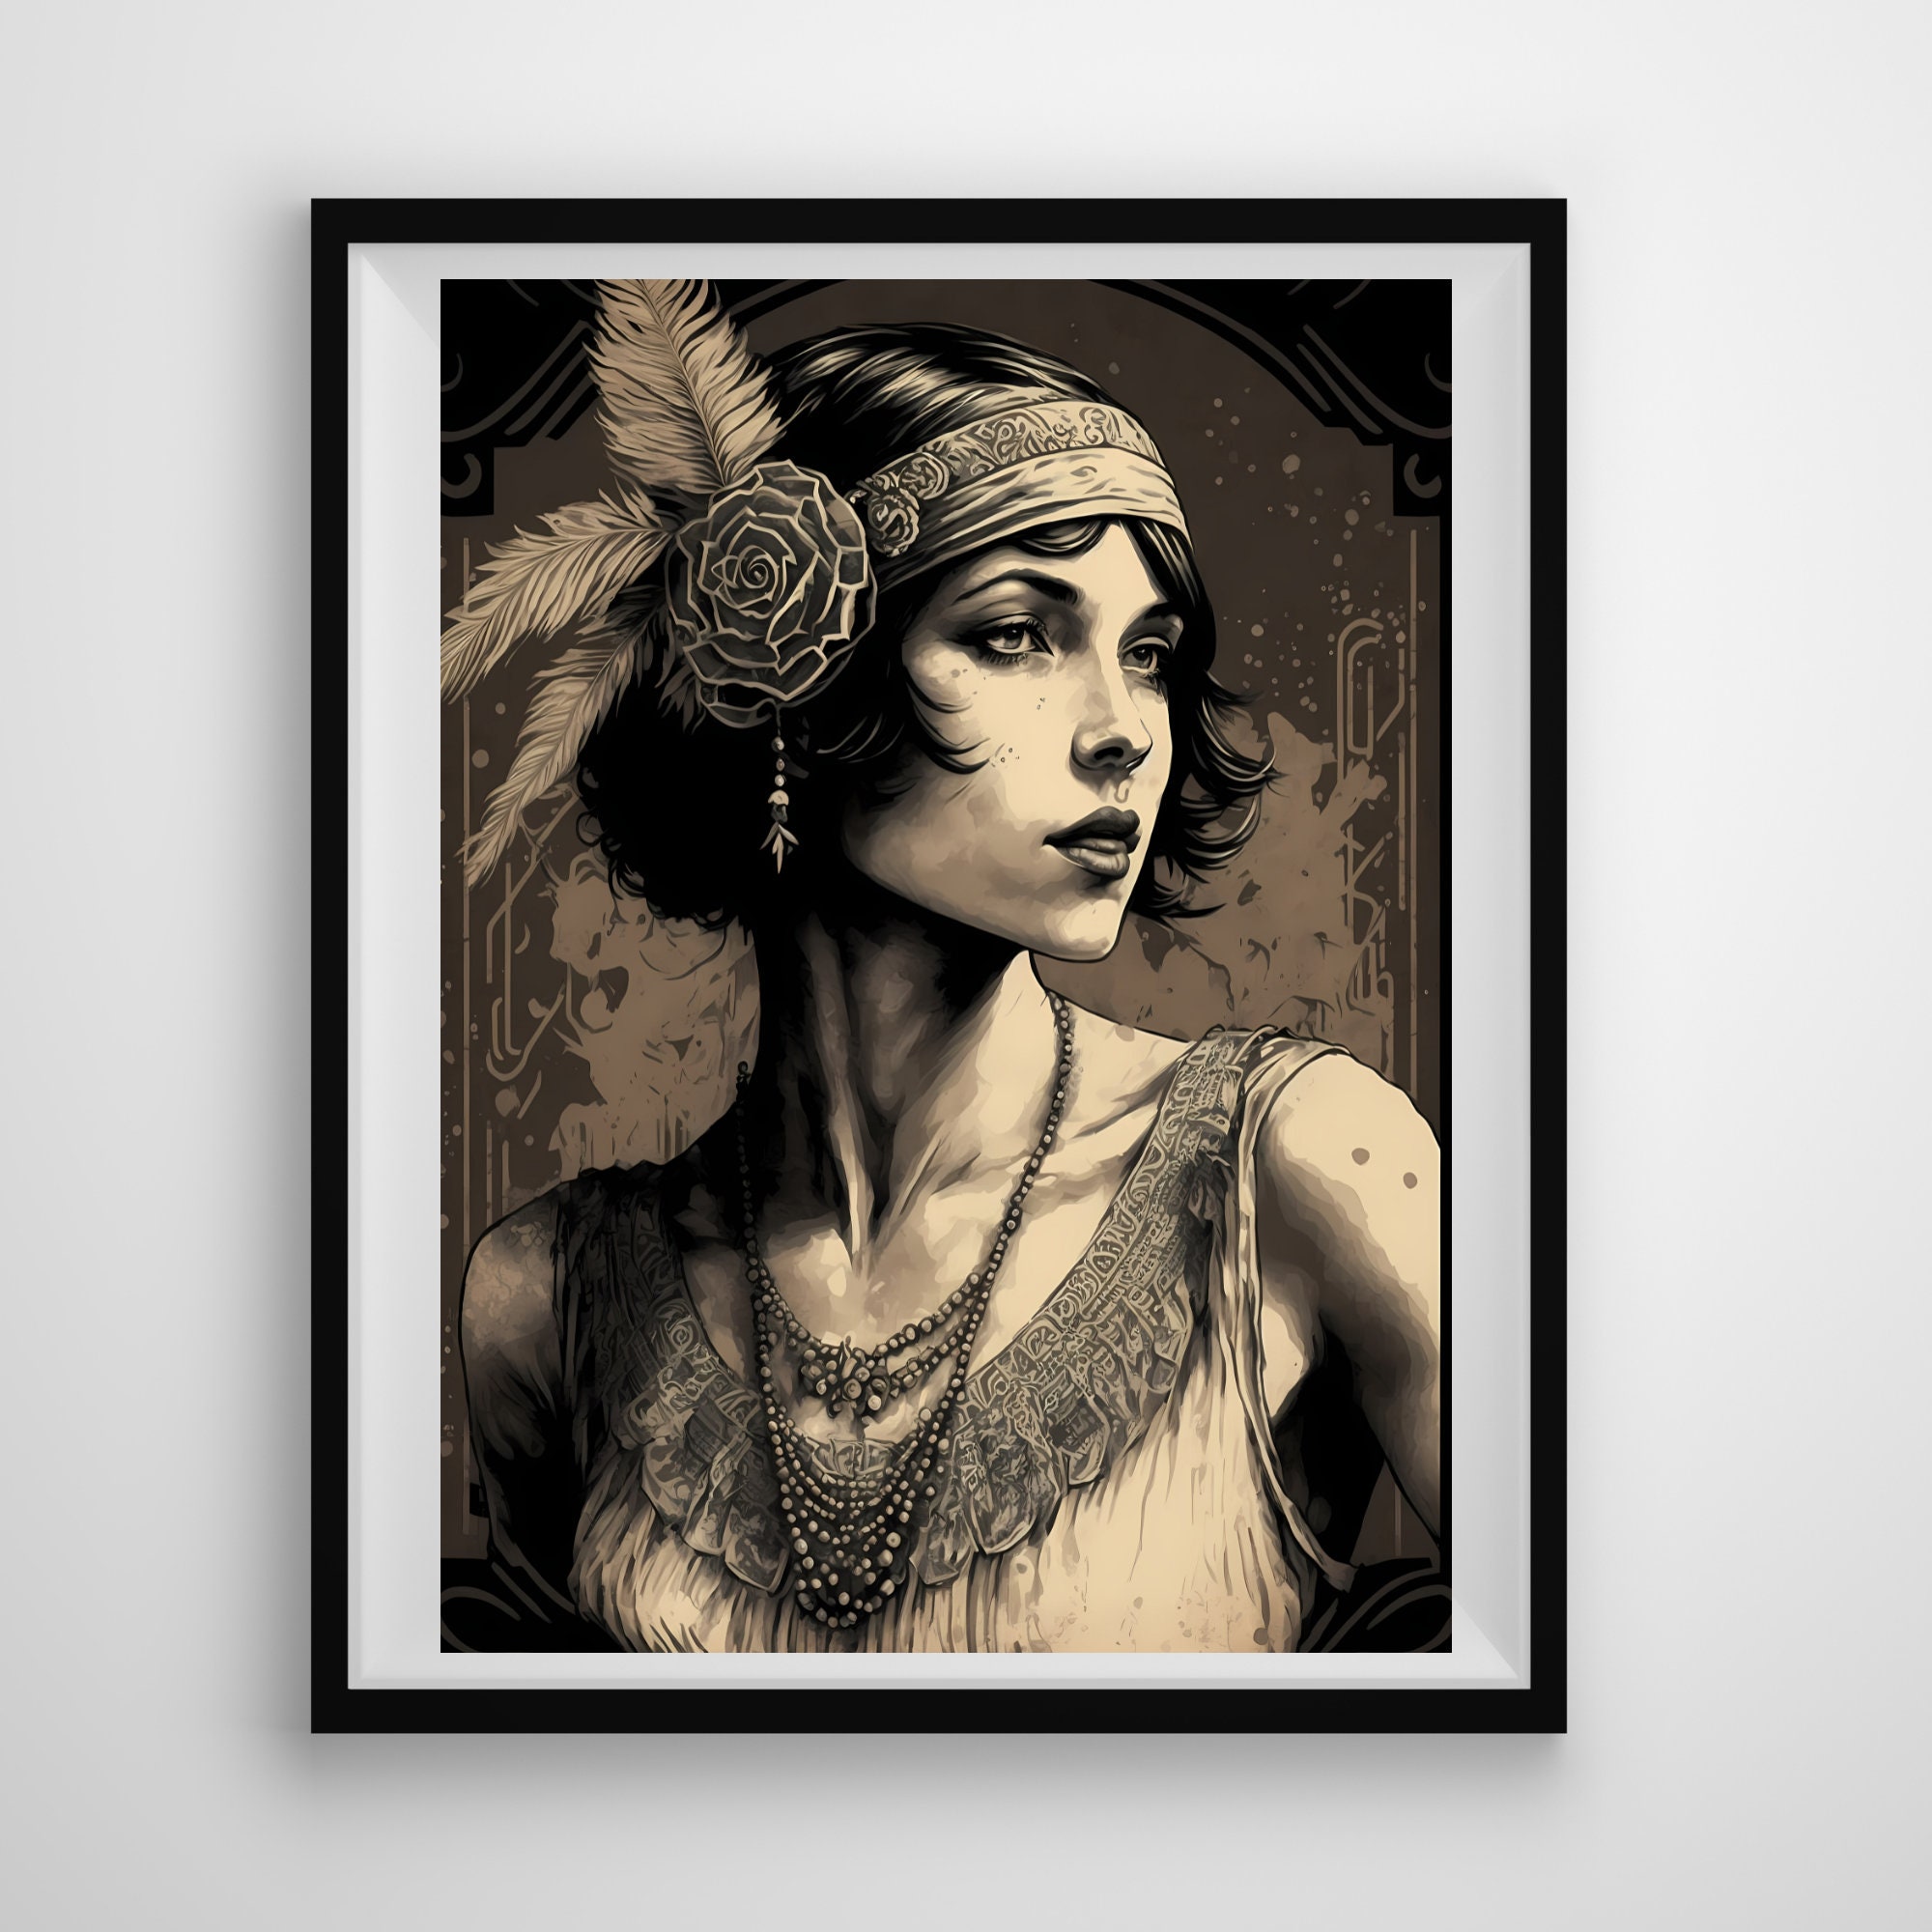 Vintage Painting of Flapper Girl Silent Movie Star 1920s Style Painting  Golden Era Art Deco the Great Gatsby Style Home Decor Wall Art -   Denmark